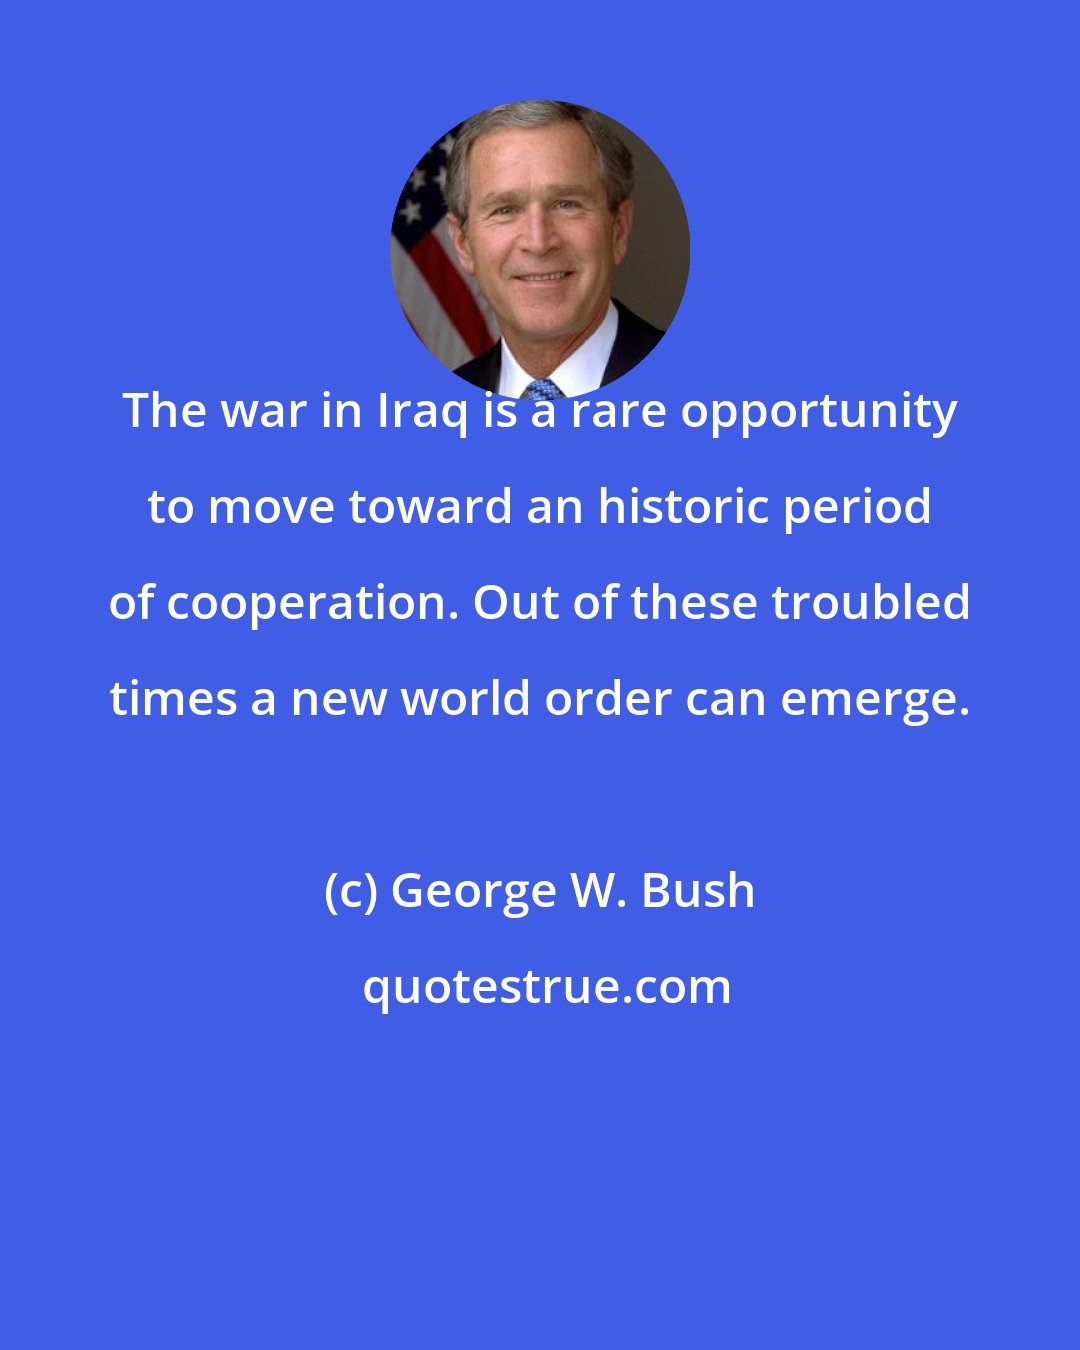 George W. Bush: The war in Iraq is a rare opportunity to move toward an historic period of cooperation. Out of these troubled times a new world order can emerge.